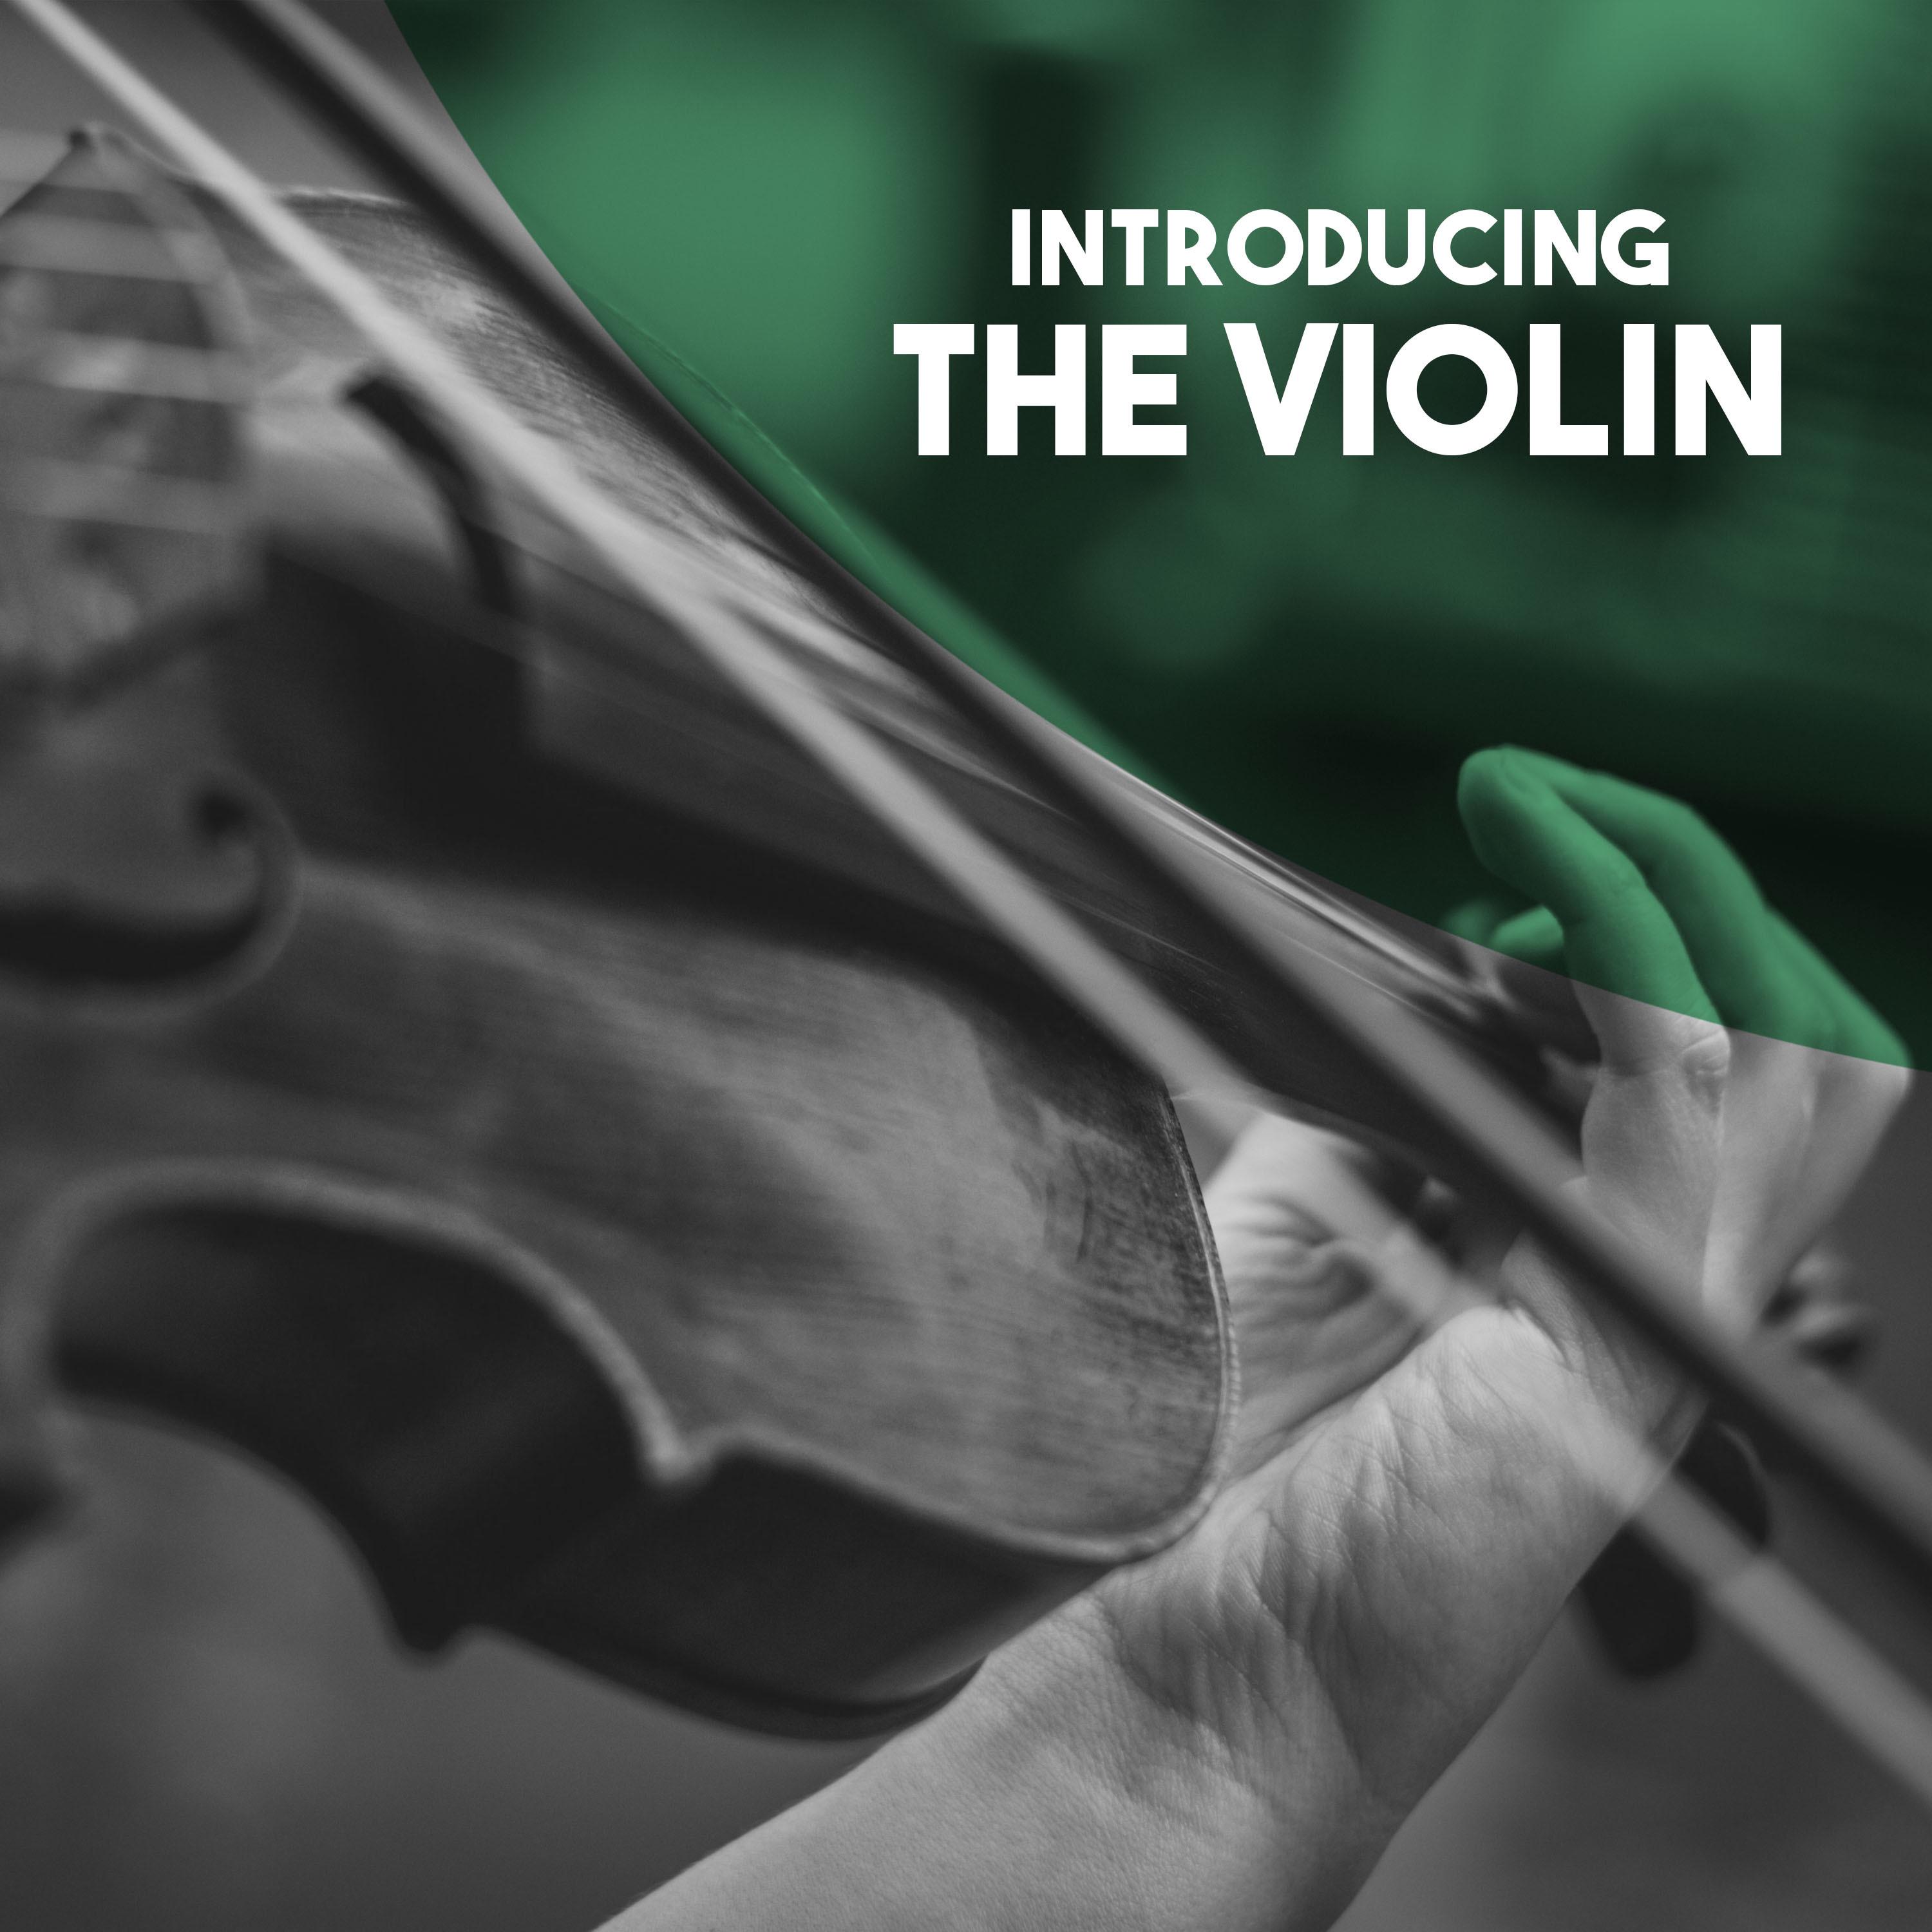 Introducing: The Violin